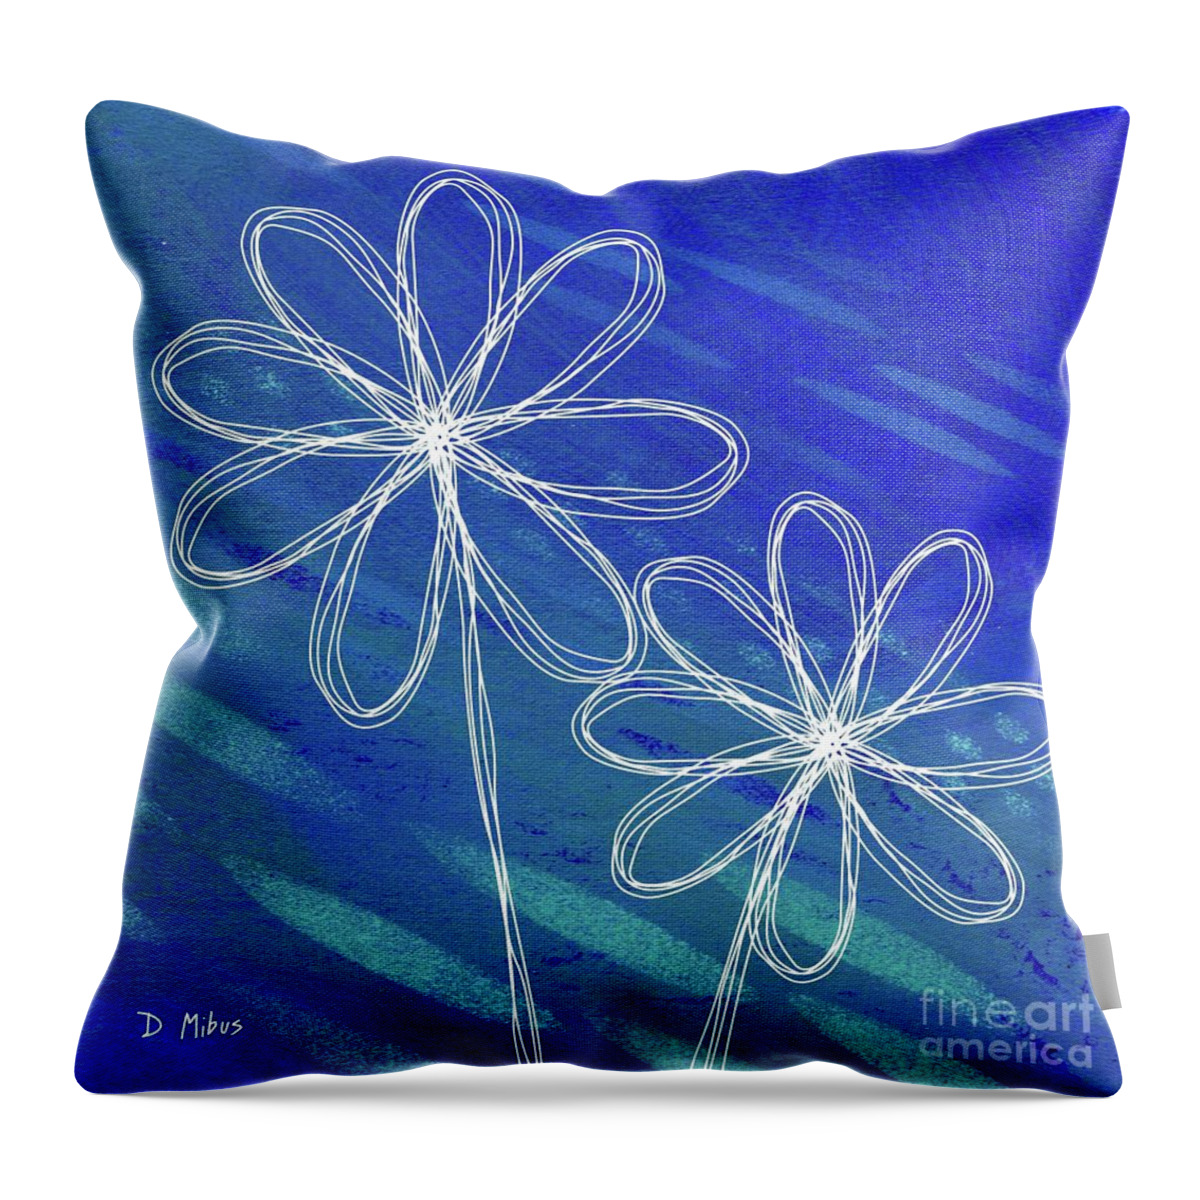 Retro Flowers Throw Pillow featuring the mixed media White Abstract Flowers on Blue and Green by Donna Mibus